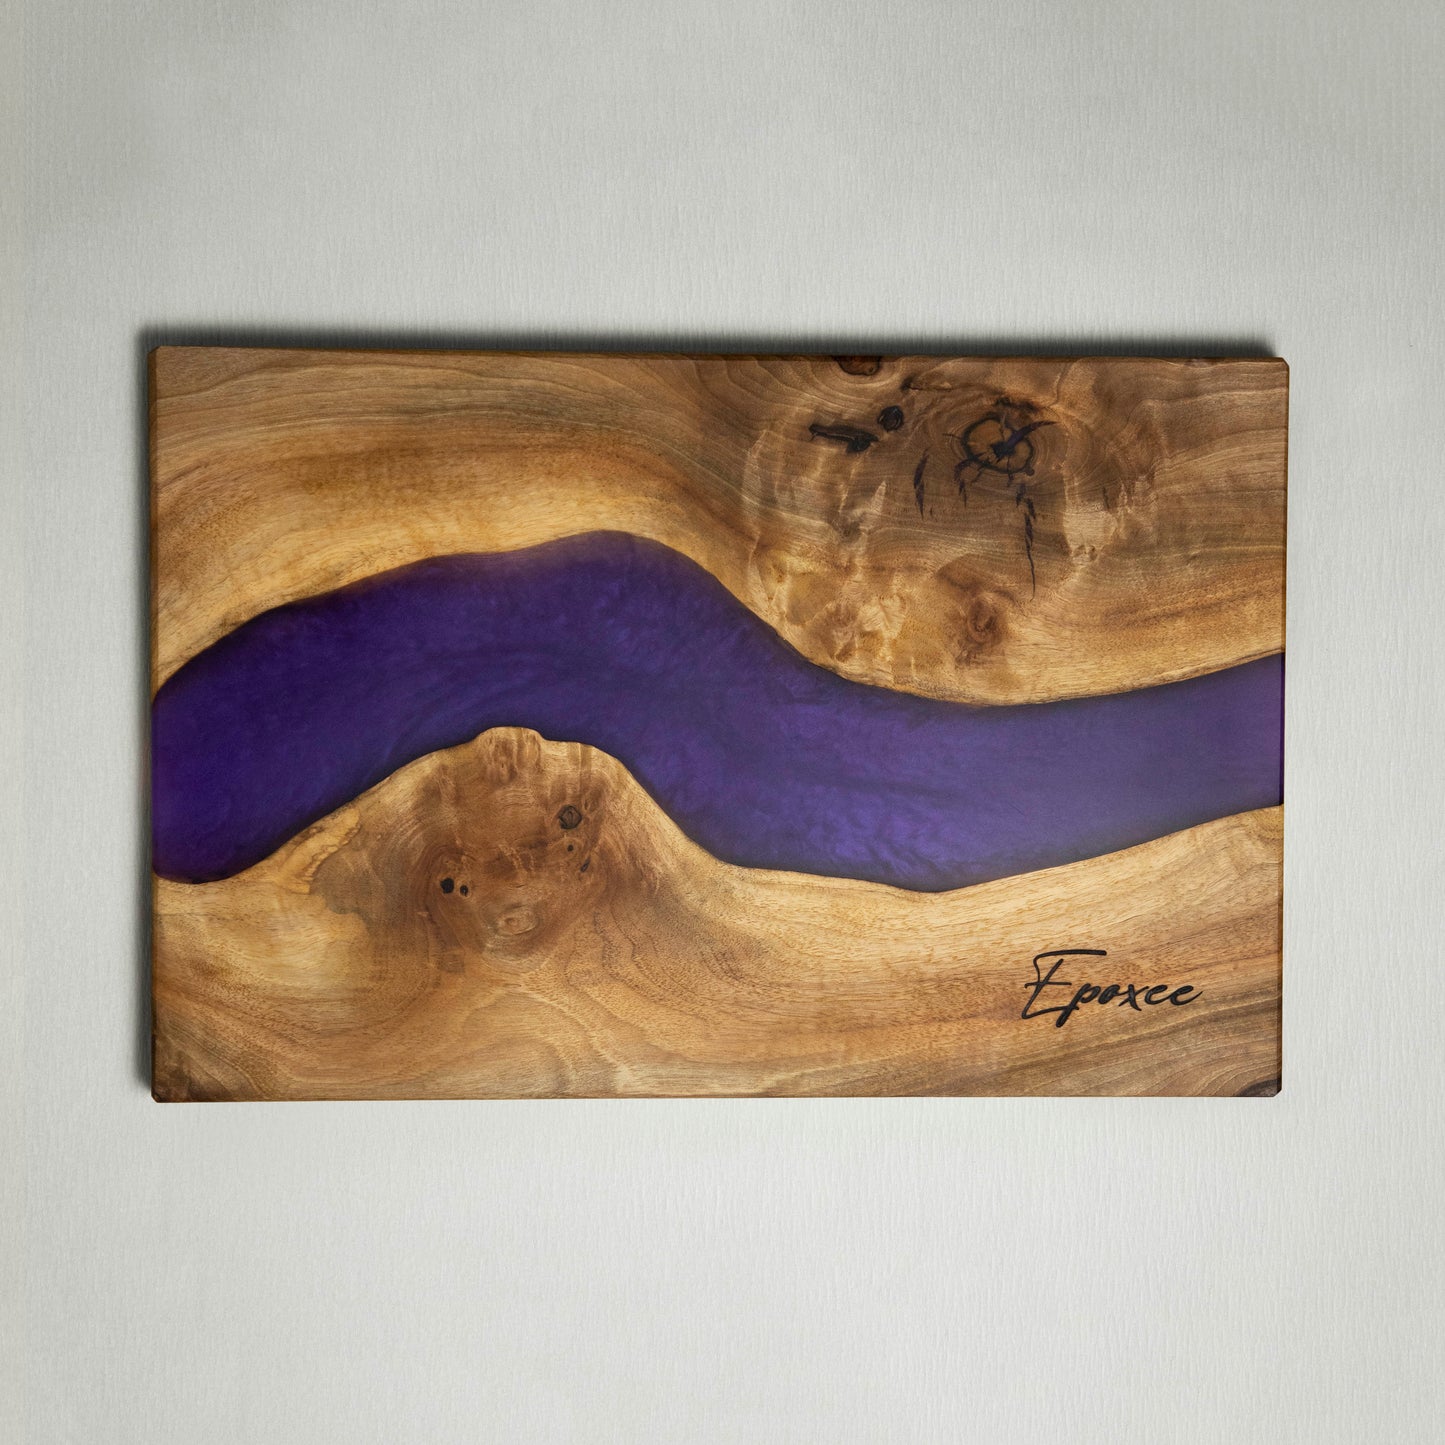 Serving board made from wood and epoxy resin in the color purple